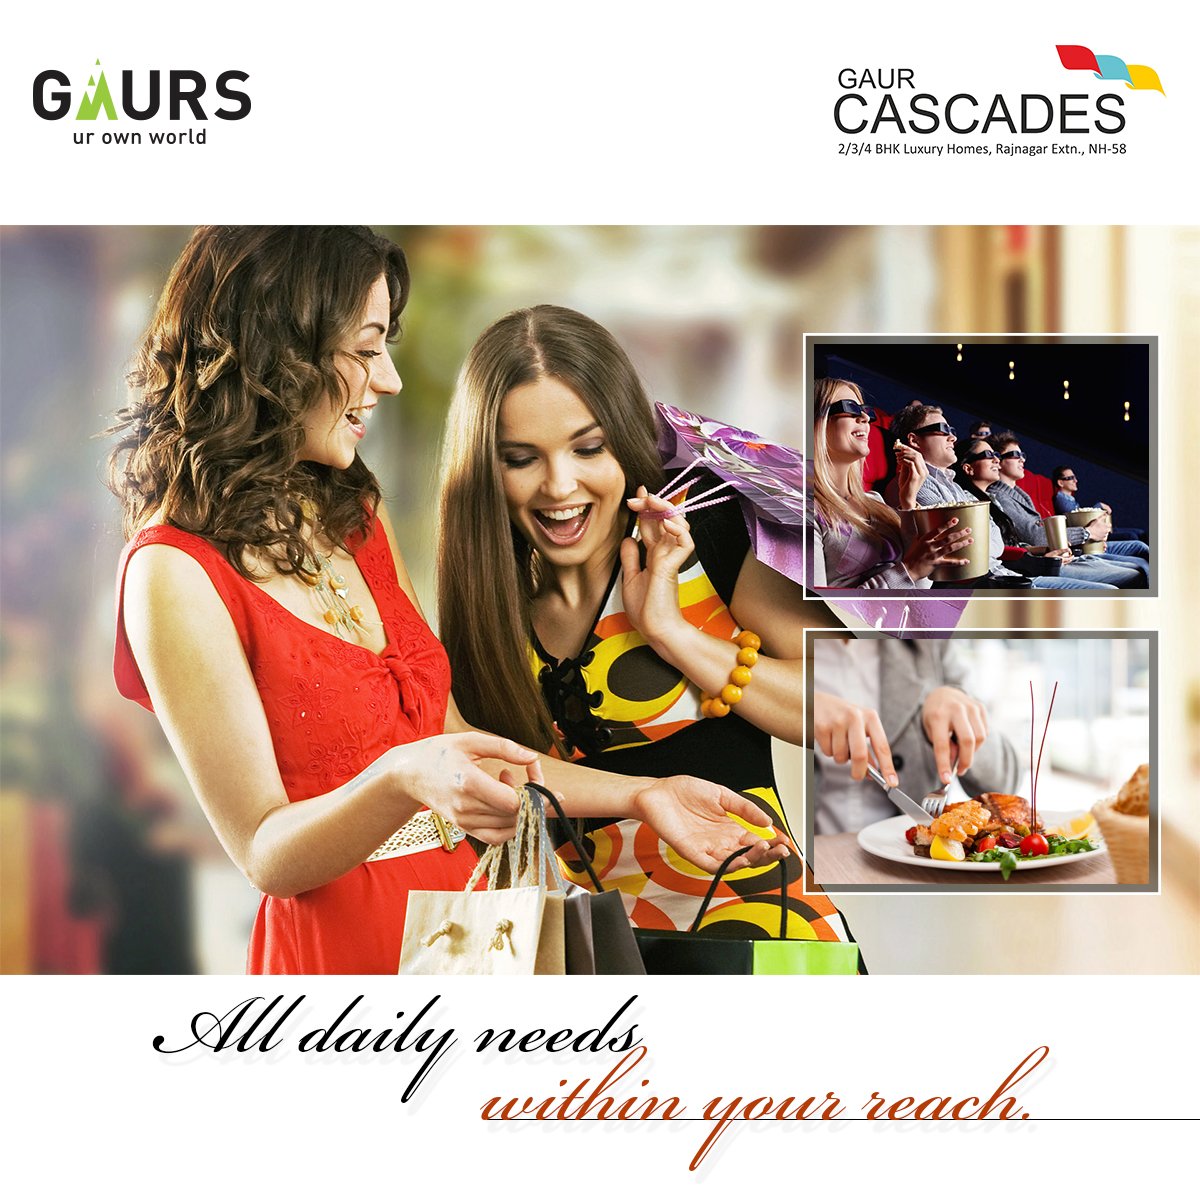 All daily needs fulfilled at Gaur Cascades